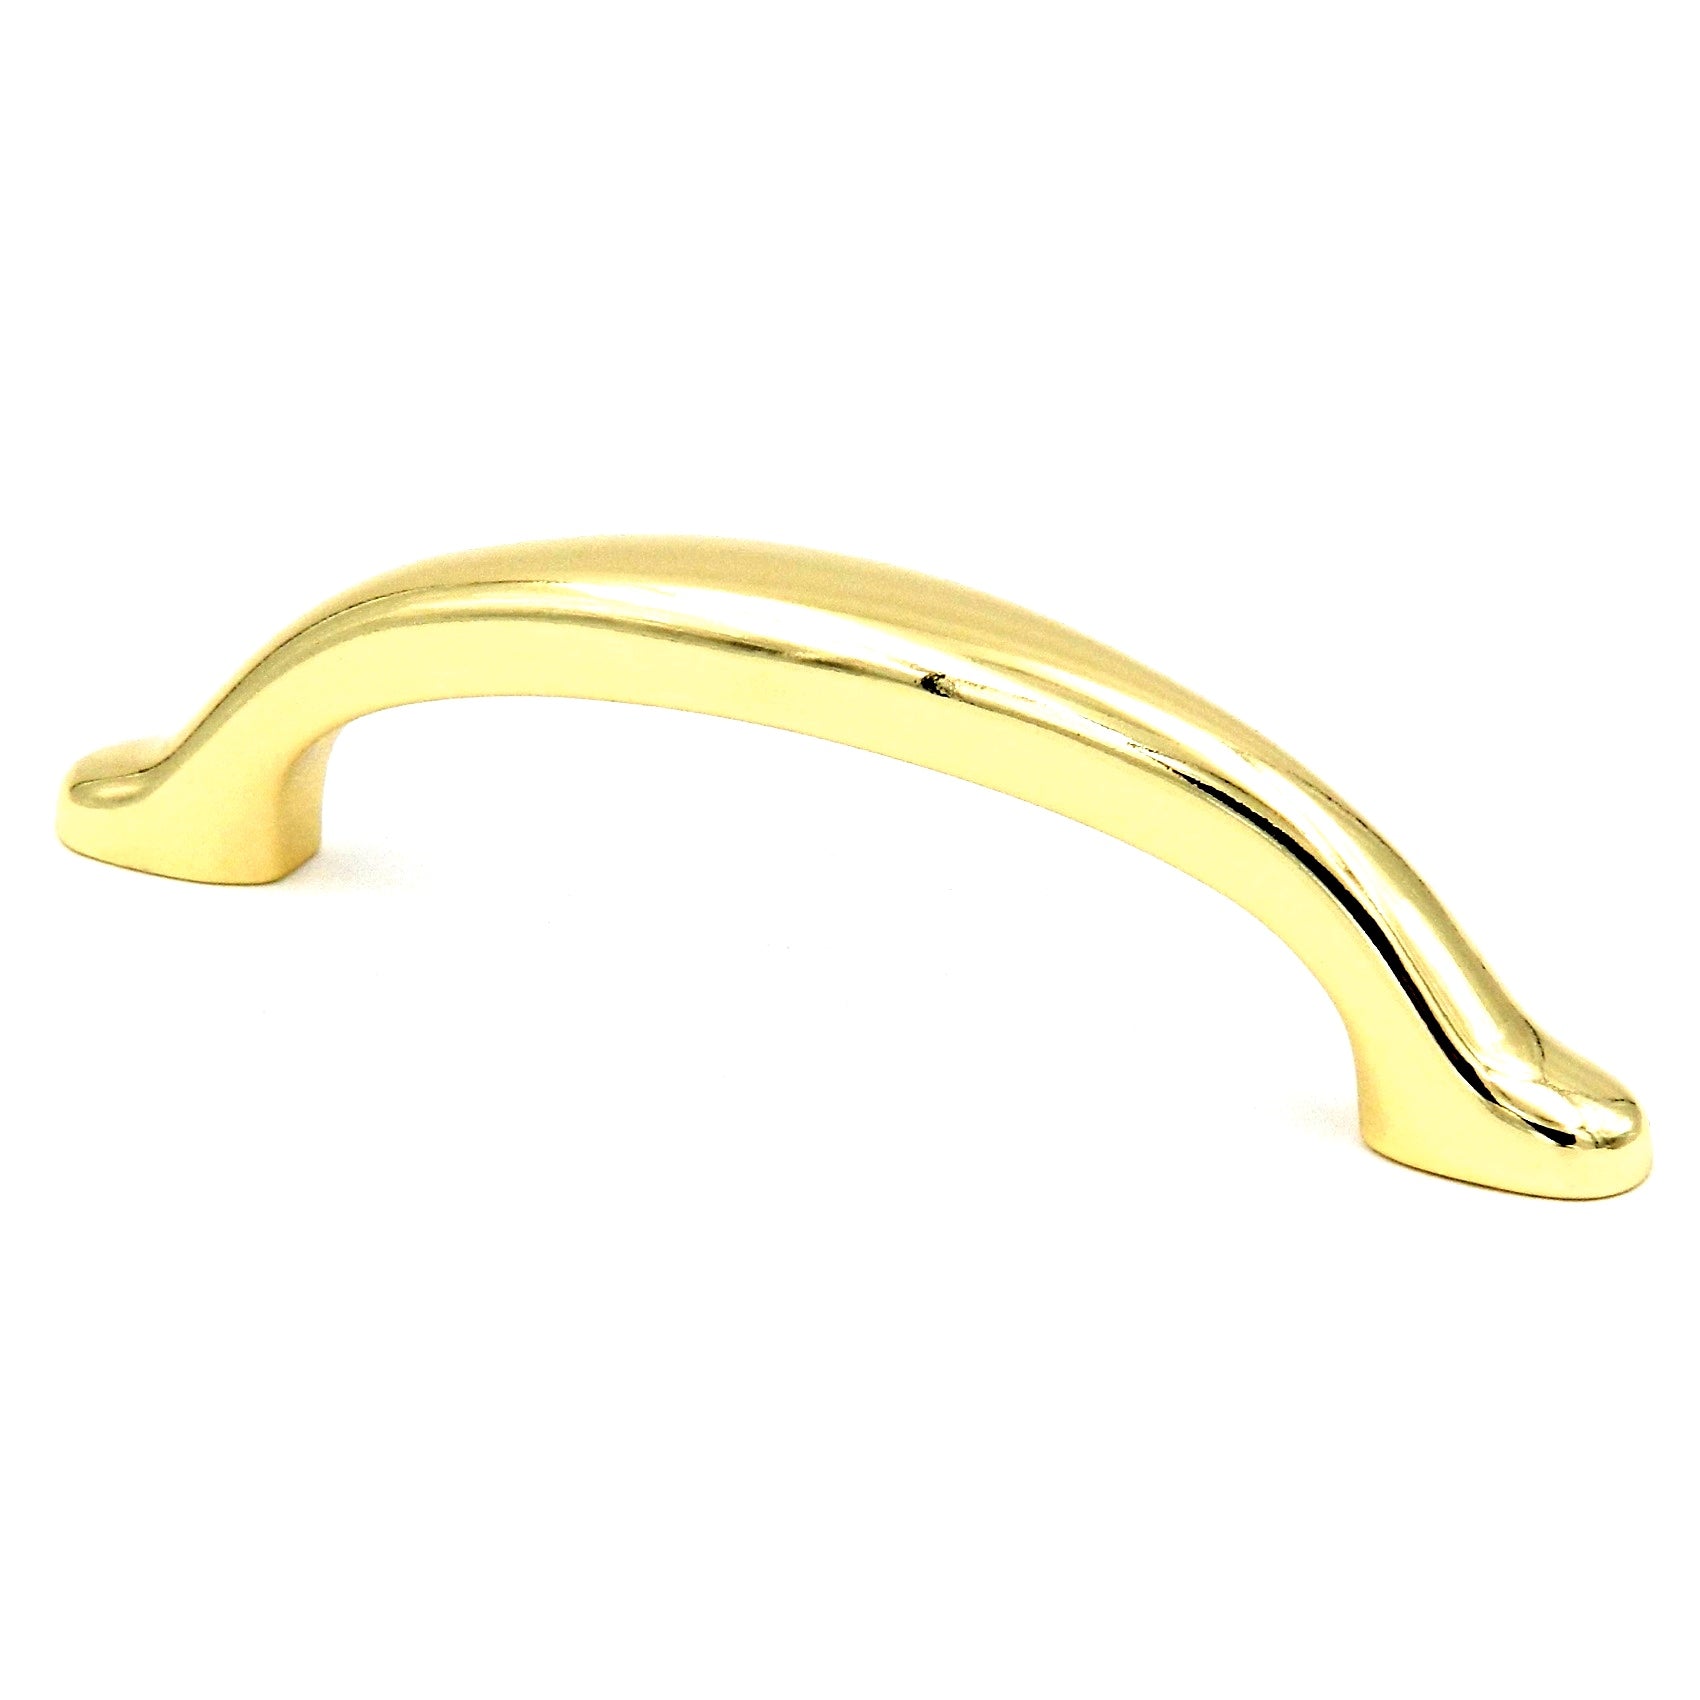 20 Pack Hickory Eclipse P331-UB Ultra Brass 3"cc Arch Cabinet Handle Pulls